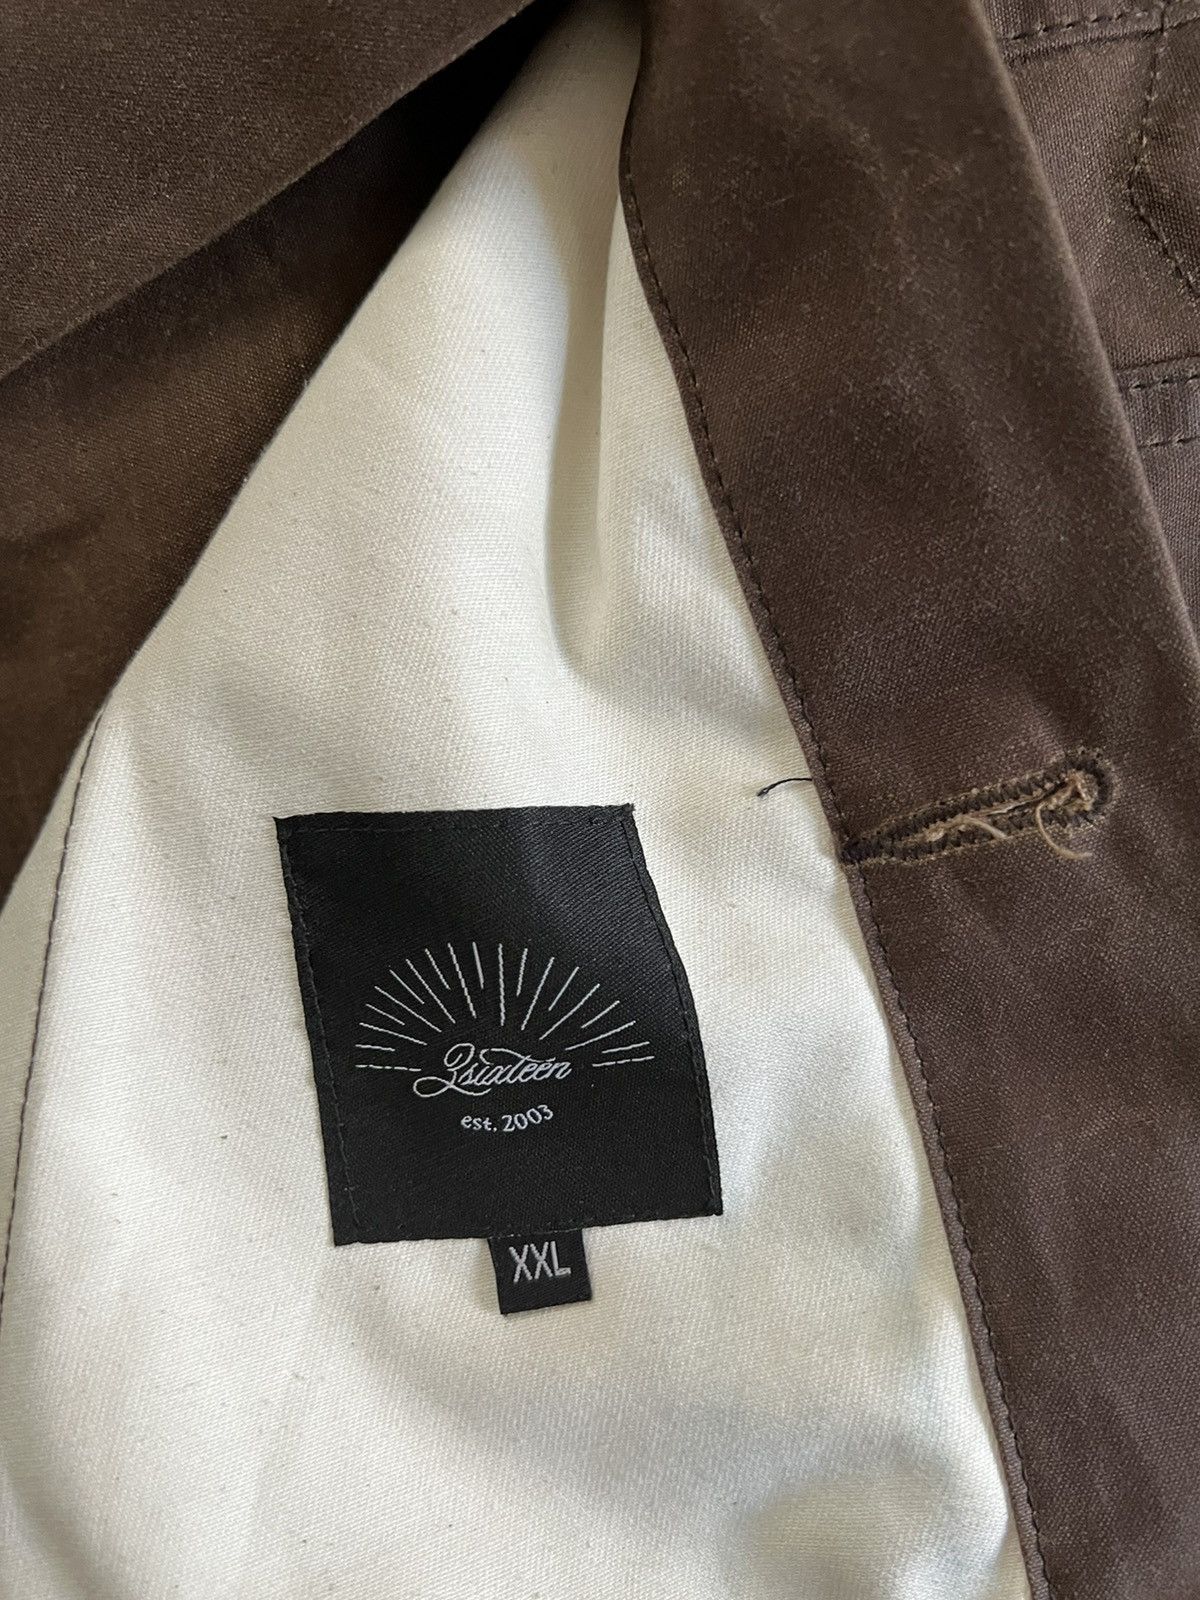 3sixteen Modified Type-3 Jacket in Field Tan Waxed Canvas Size US XXL / EU 58 / 5 - 6 Preview